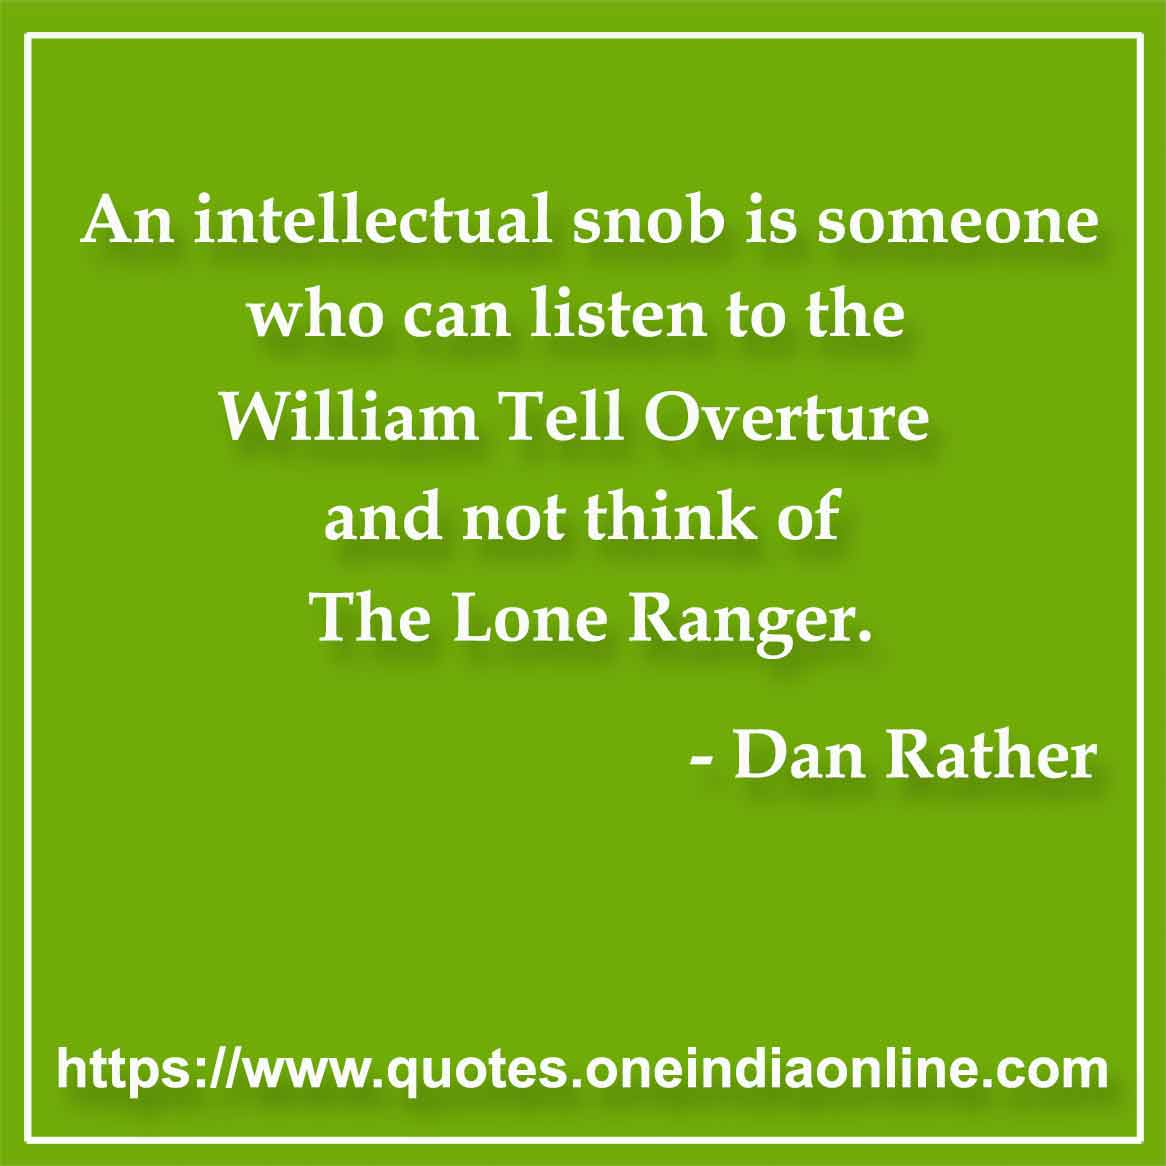 An intellectual snob is someone who can listen to the William Tell Overture and not think of The Lone Ranger.

- Music Quotes by Dan Rather 